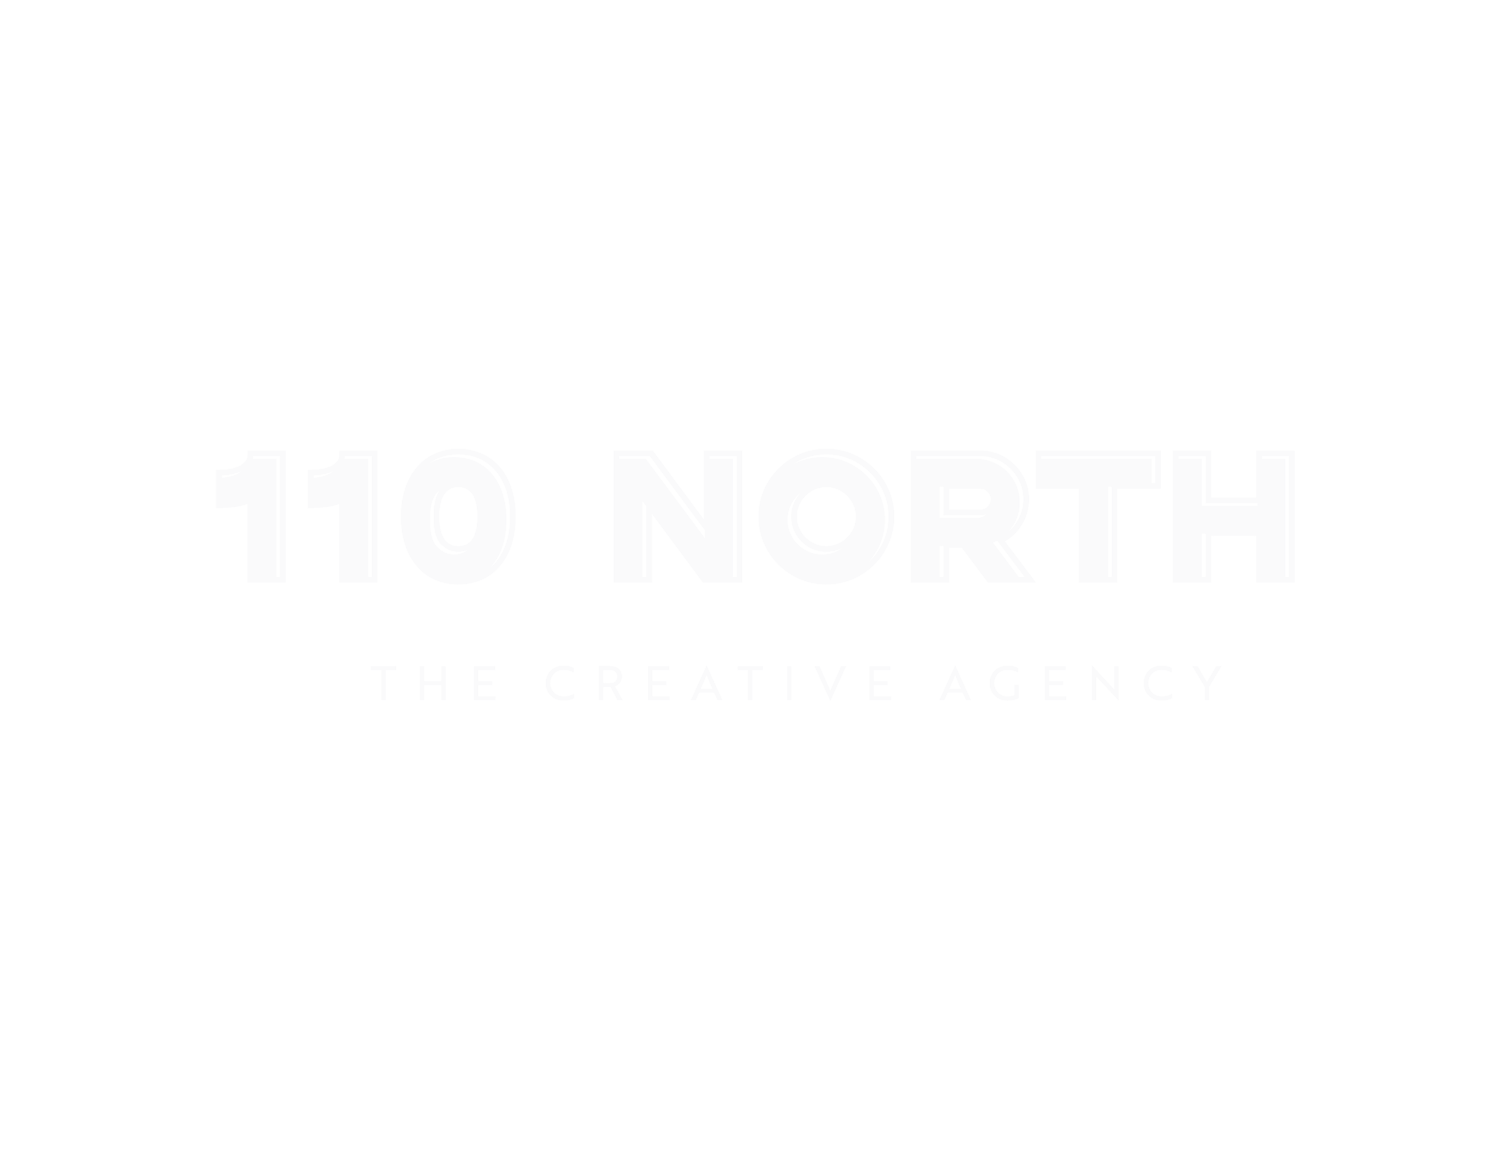 110 North | The Creative Agency